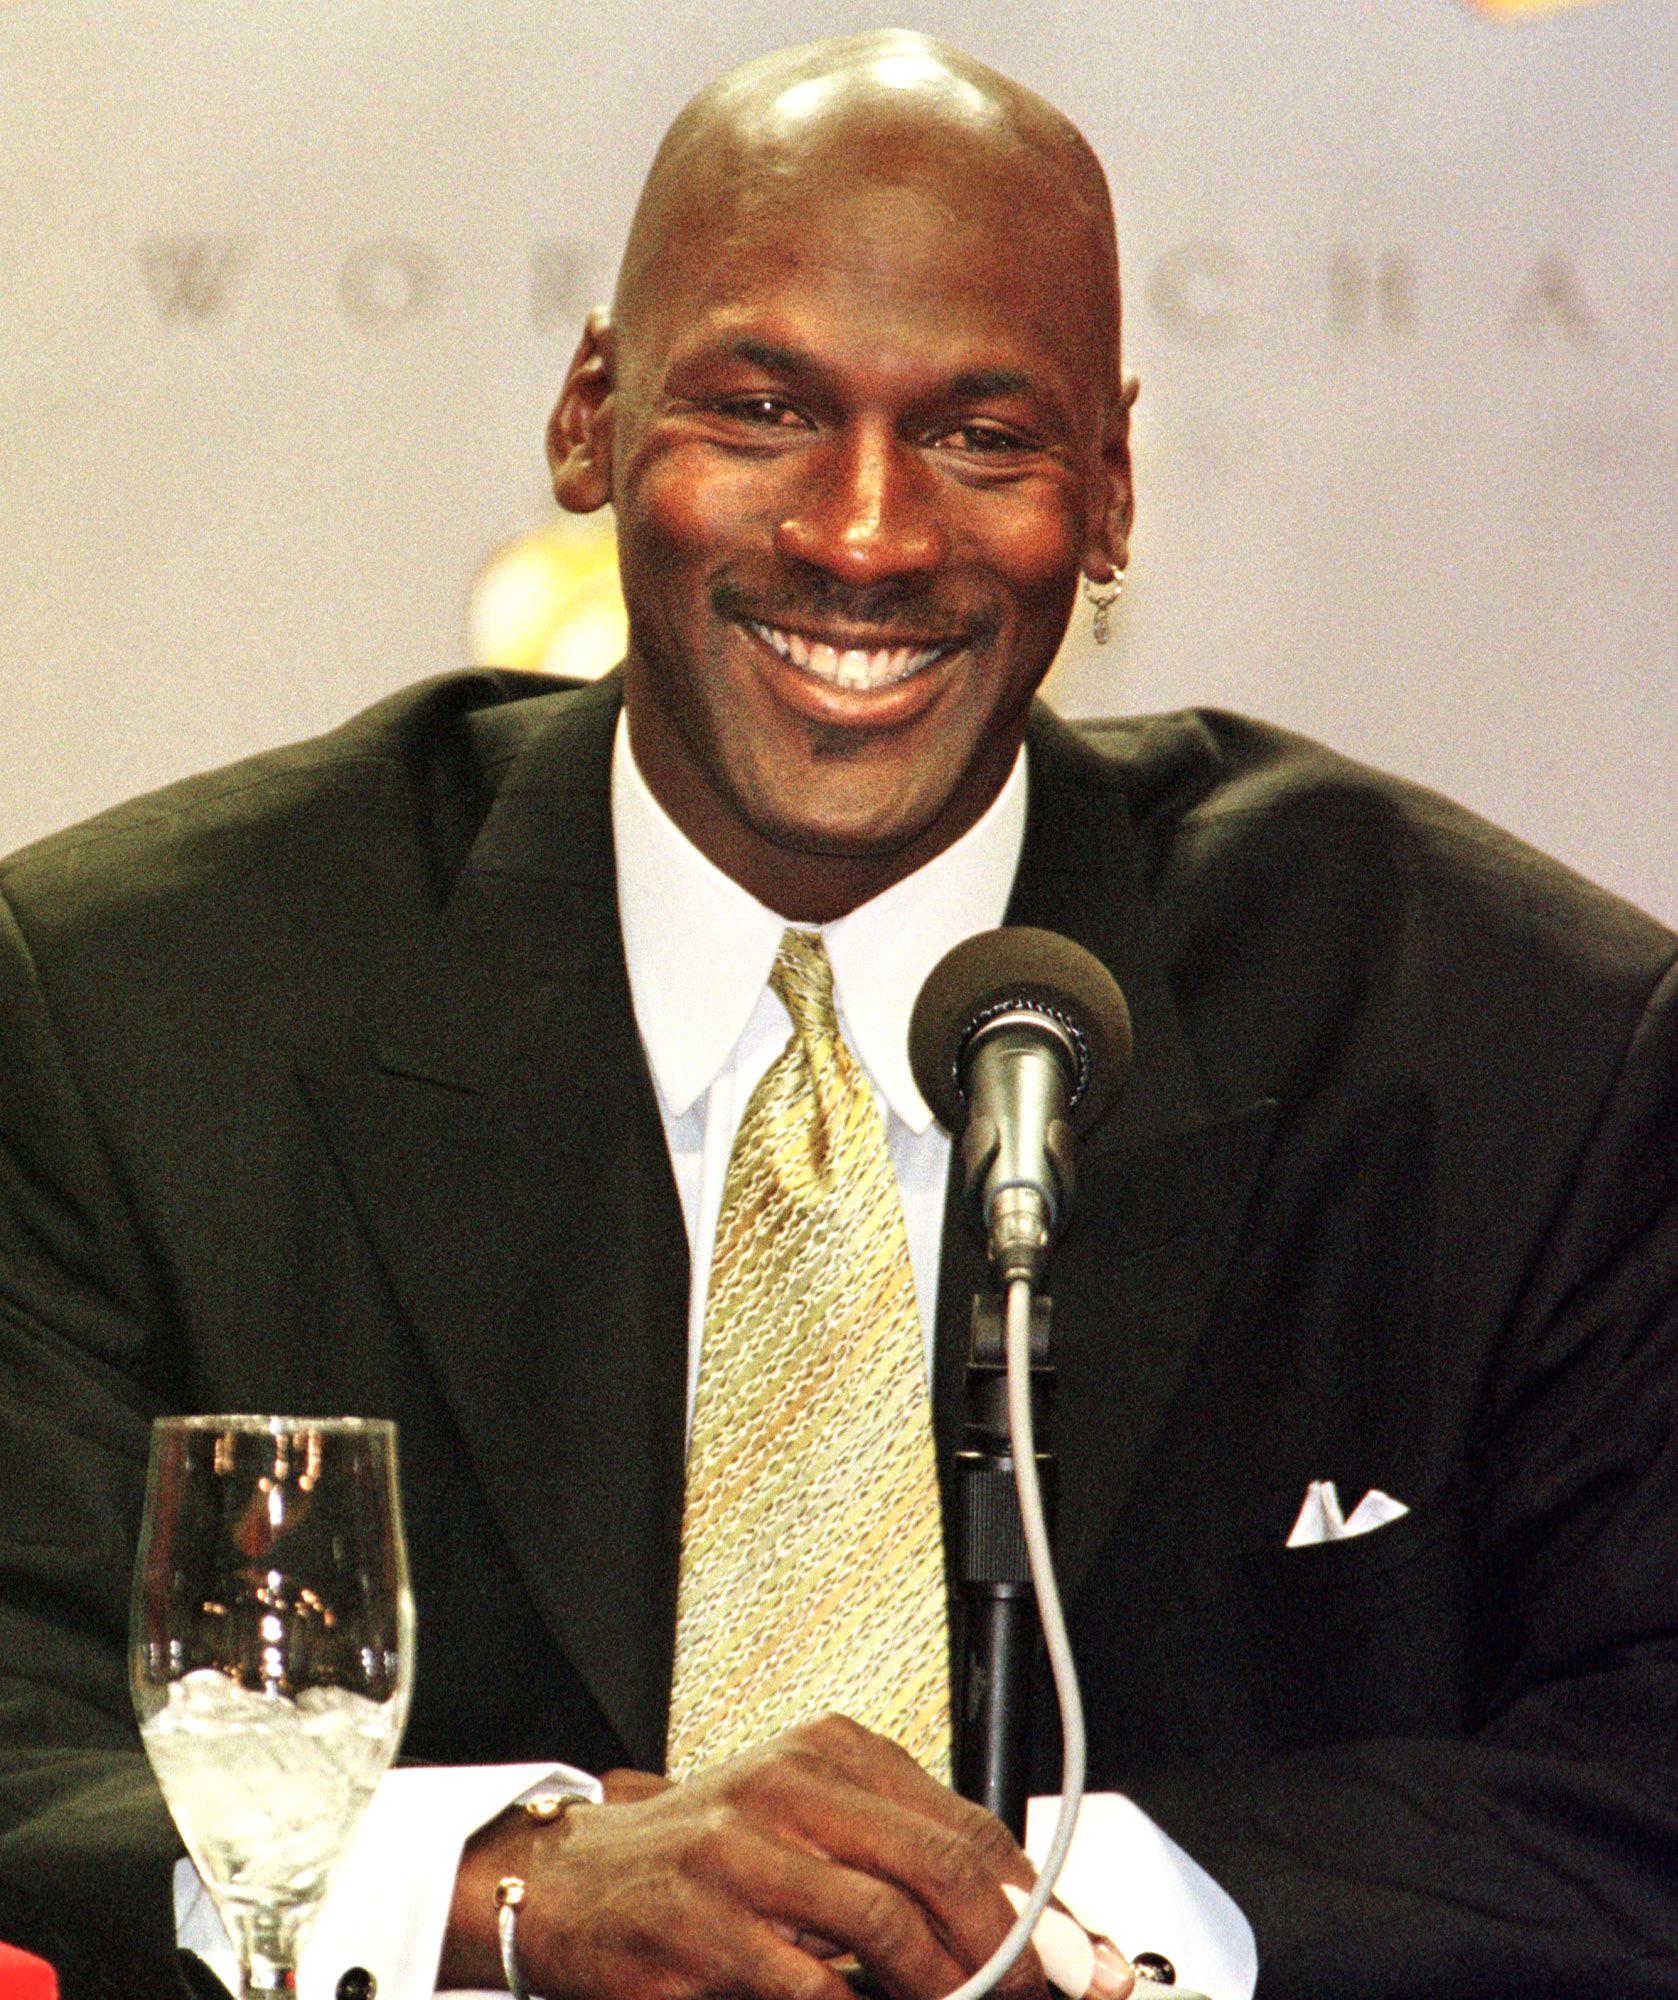 Michael Jordan announces his retirement during a press conference on January 13, 1999 in Chicago | Source: Getty Images